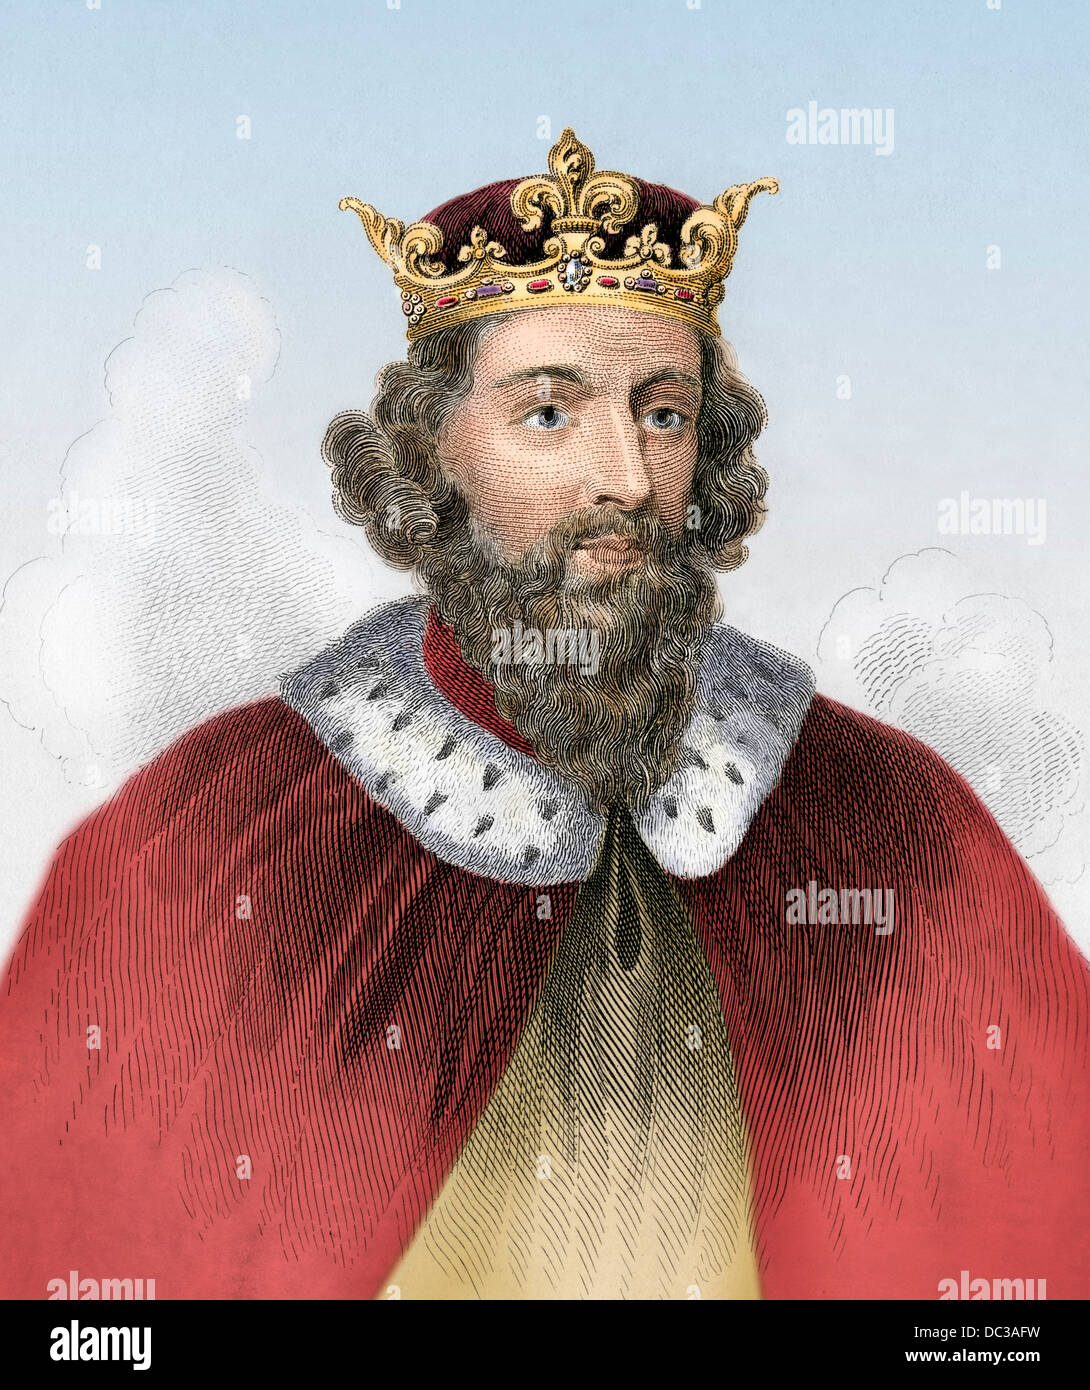 Alfred the Great, King of Wessex, 800s A.D. Hand-colored woodcut Stock Photo